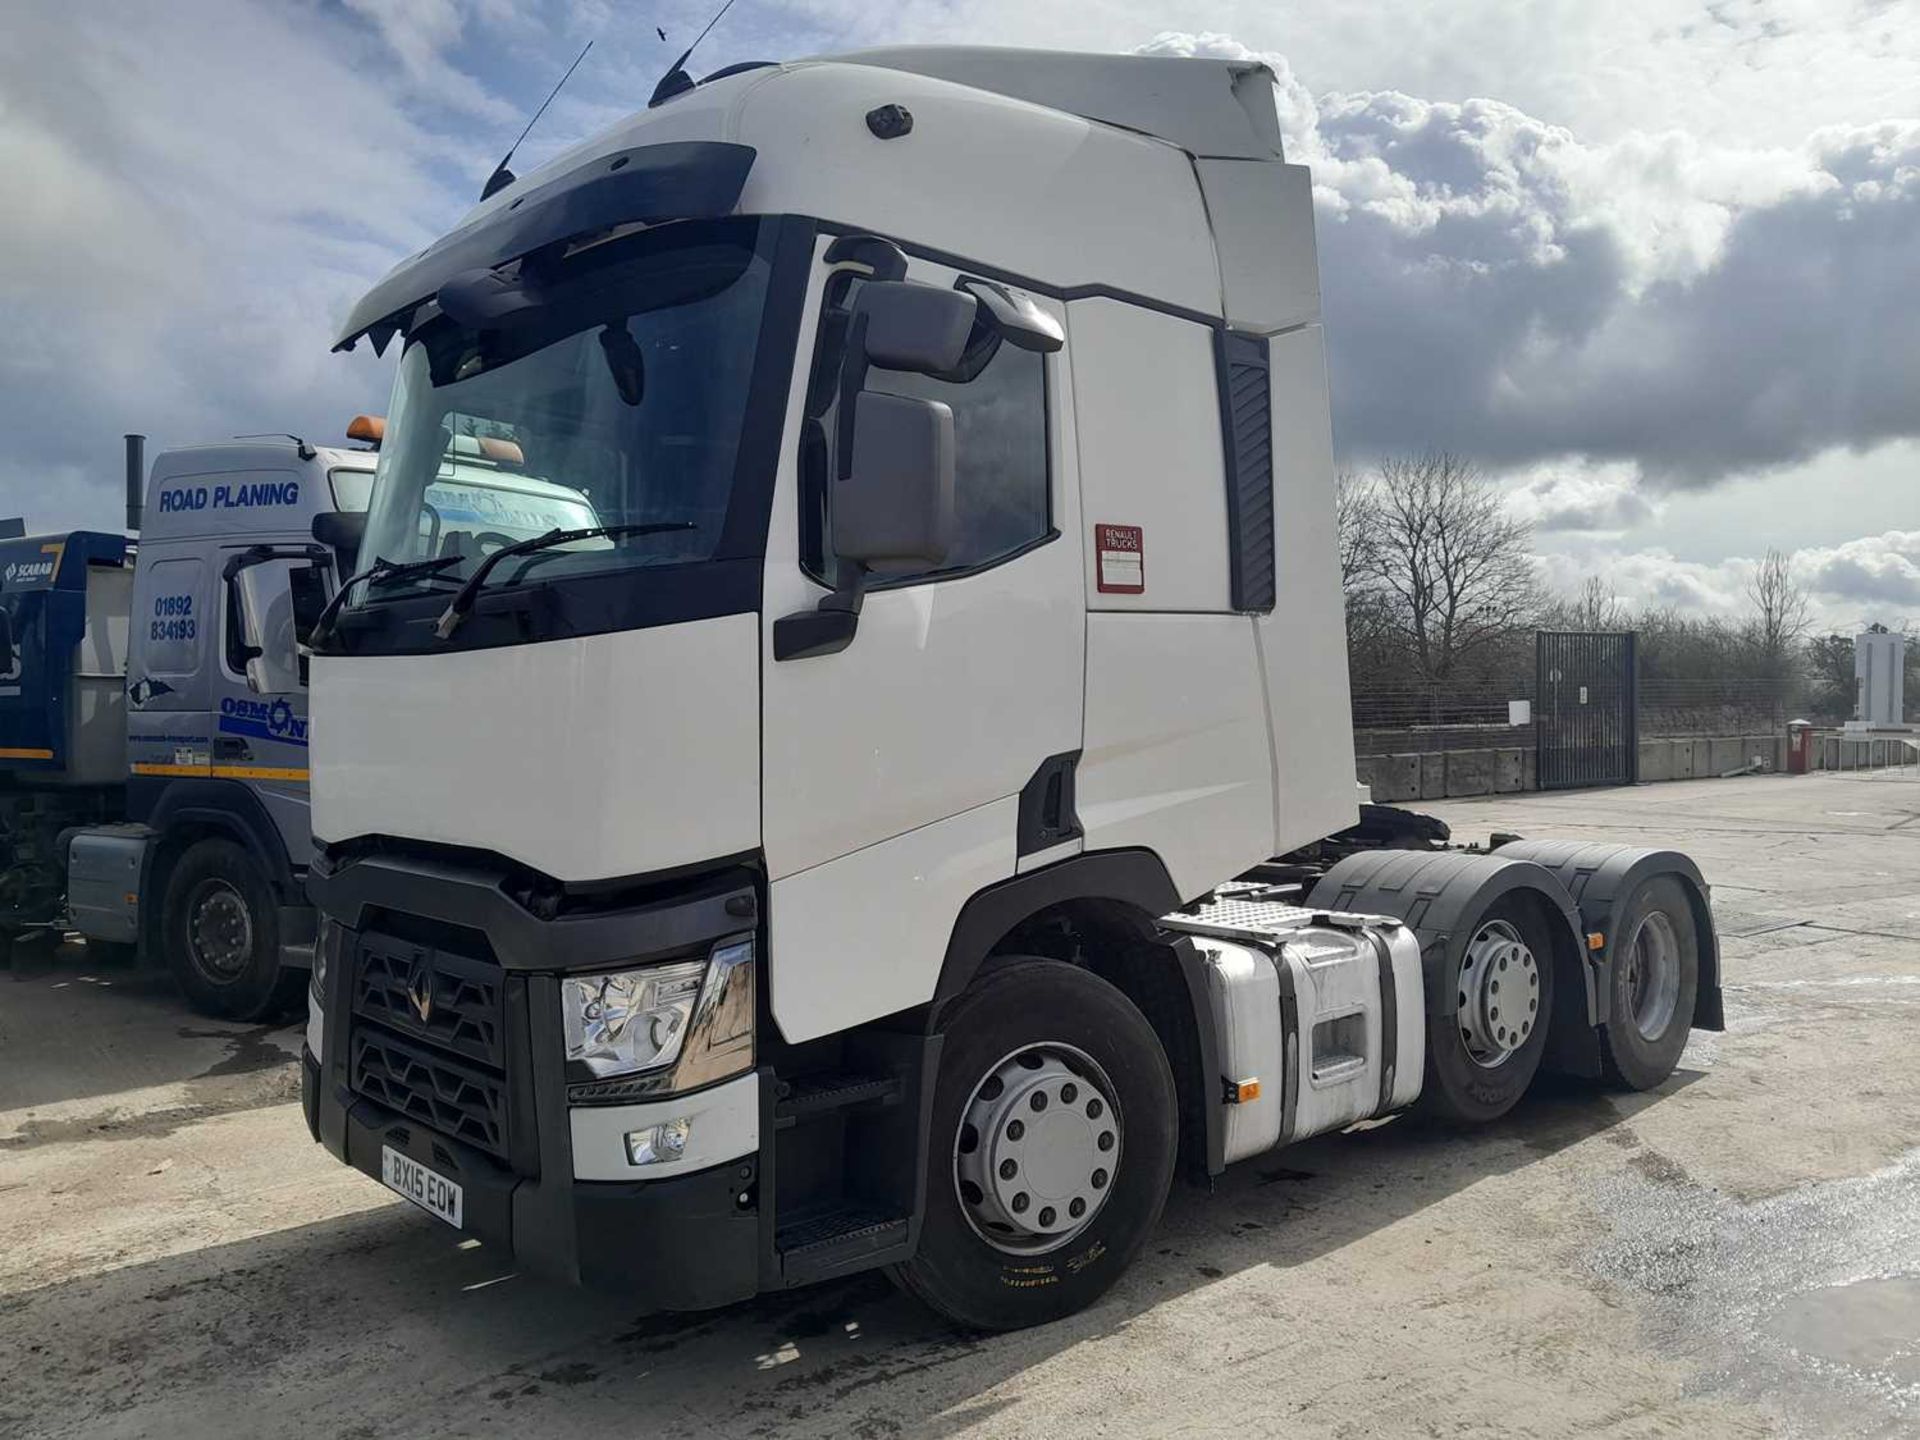 2015 Renault T460 6x2 Midlift, Automatic Gear Box, A/C